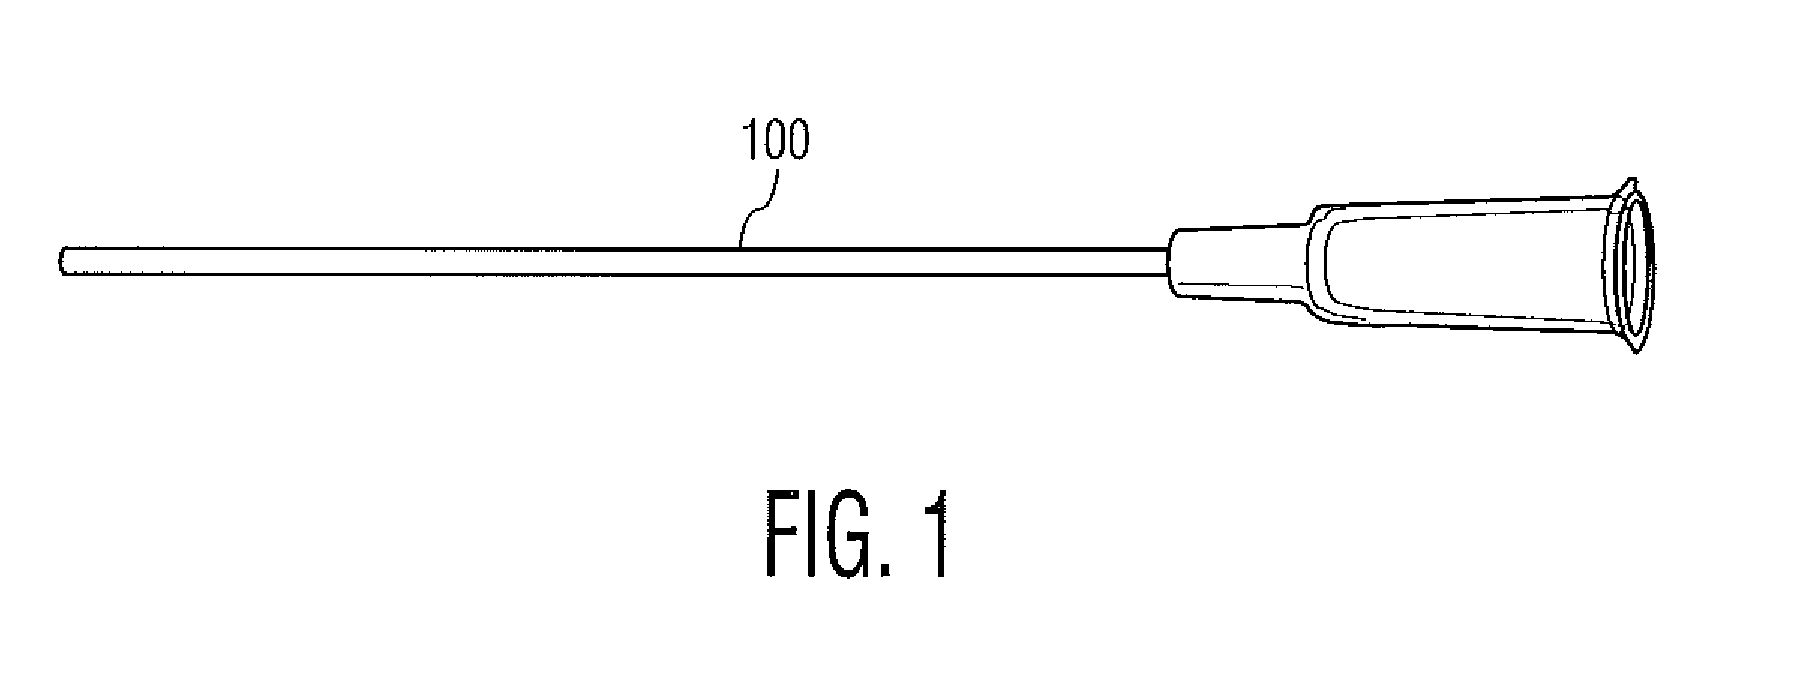 Catheter System for Measuring and Marking Vessel Characteristics